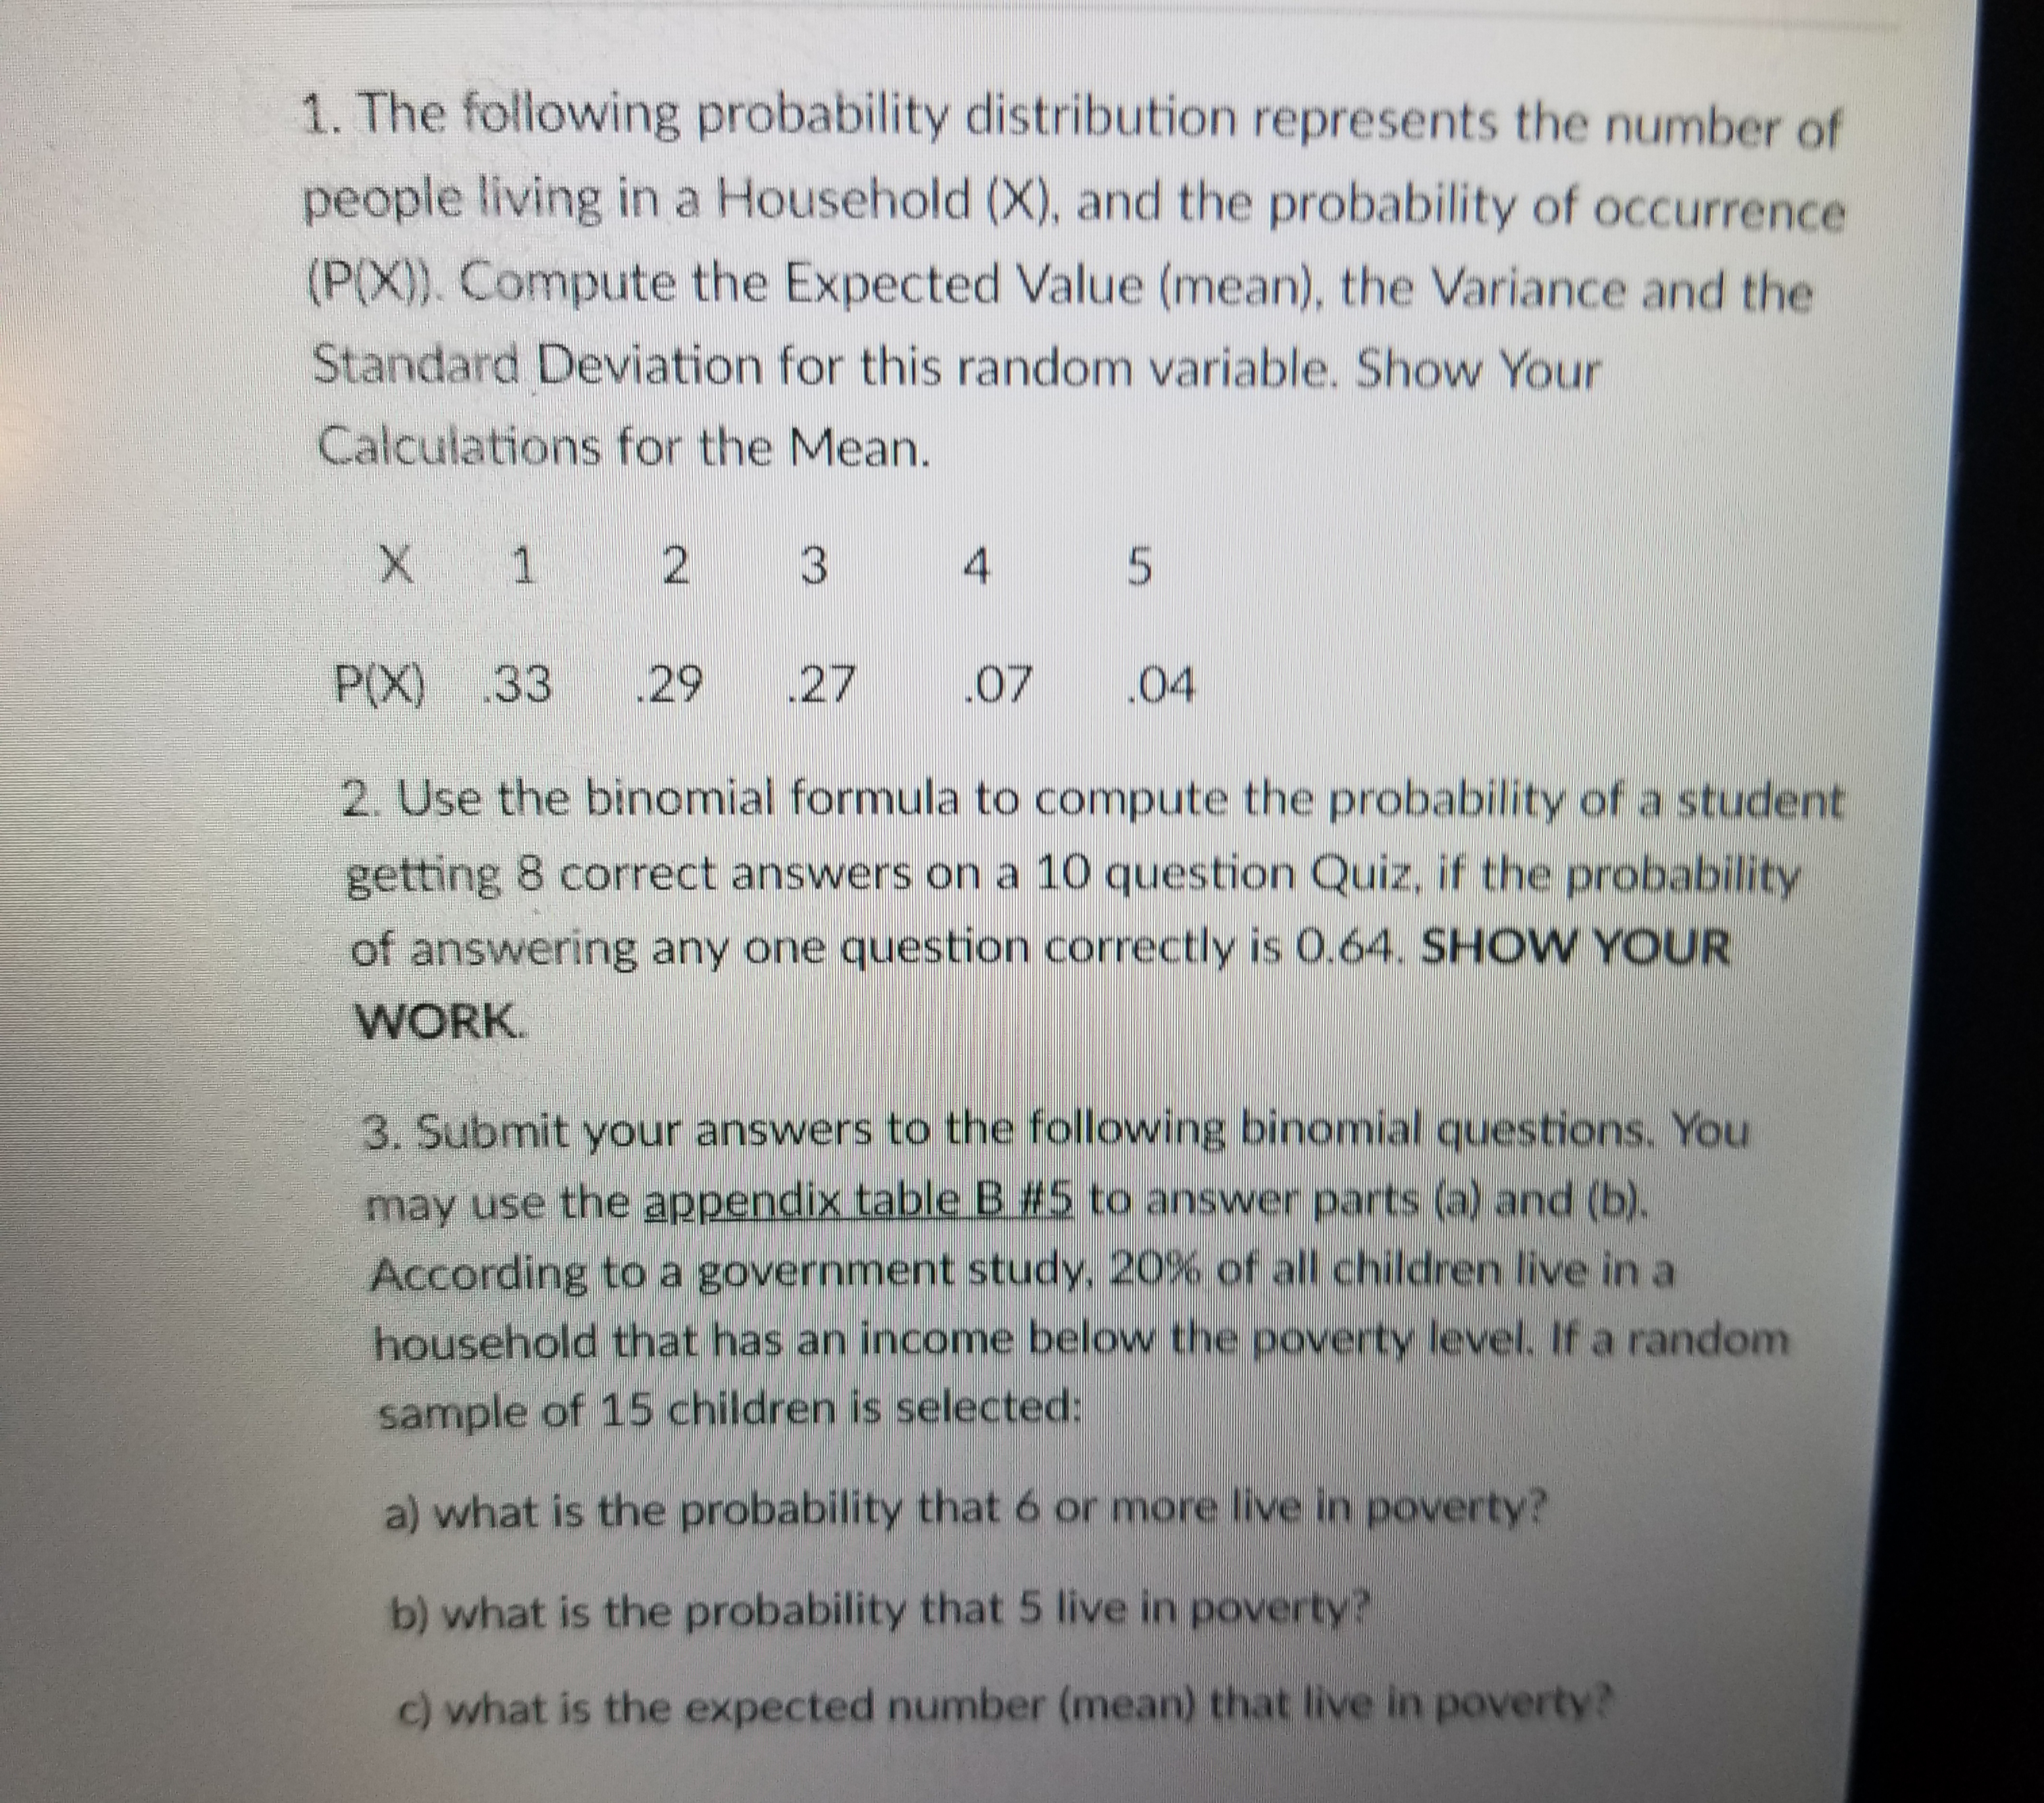 1. The following probability distribution represents the number of
people living in a Household (X), and the probability of occurrence
(P(X). Compute the Expected Value (mean), the Variance and the
Standard Deviation for this random variable. Show Your
Calculations for the Mean.
X 1 2 3 4 5
P(X) 33 29 27 07 .04
2. Use the binomial formula to compute the probability of a student
getting 8 correct answers on a 10 question Quiz, if the probability
of answering any one question correctly is 0.64. SHOW YOUR
WORK
3. Submit your answers to the following binomial questions. You
may use the appendix table BE2 to answer parts (a) and (b).
According to a government study, 20%of all children live in a
household that has an income below the poverty level. If a random
sample of 15 children is selected:
a) what is the probability that 6 or more live in poverty?
b) what is the probability that 5 live in poverty?
c) what is the expected number (mean) that live in poverty?
